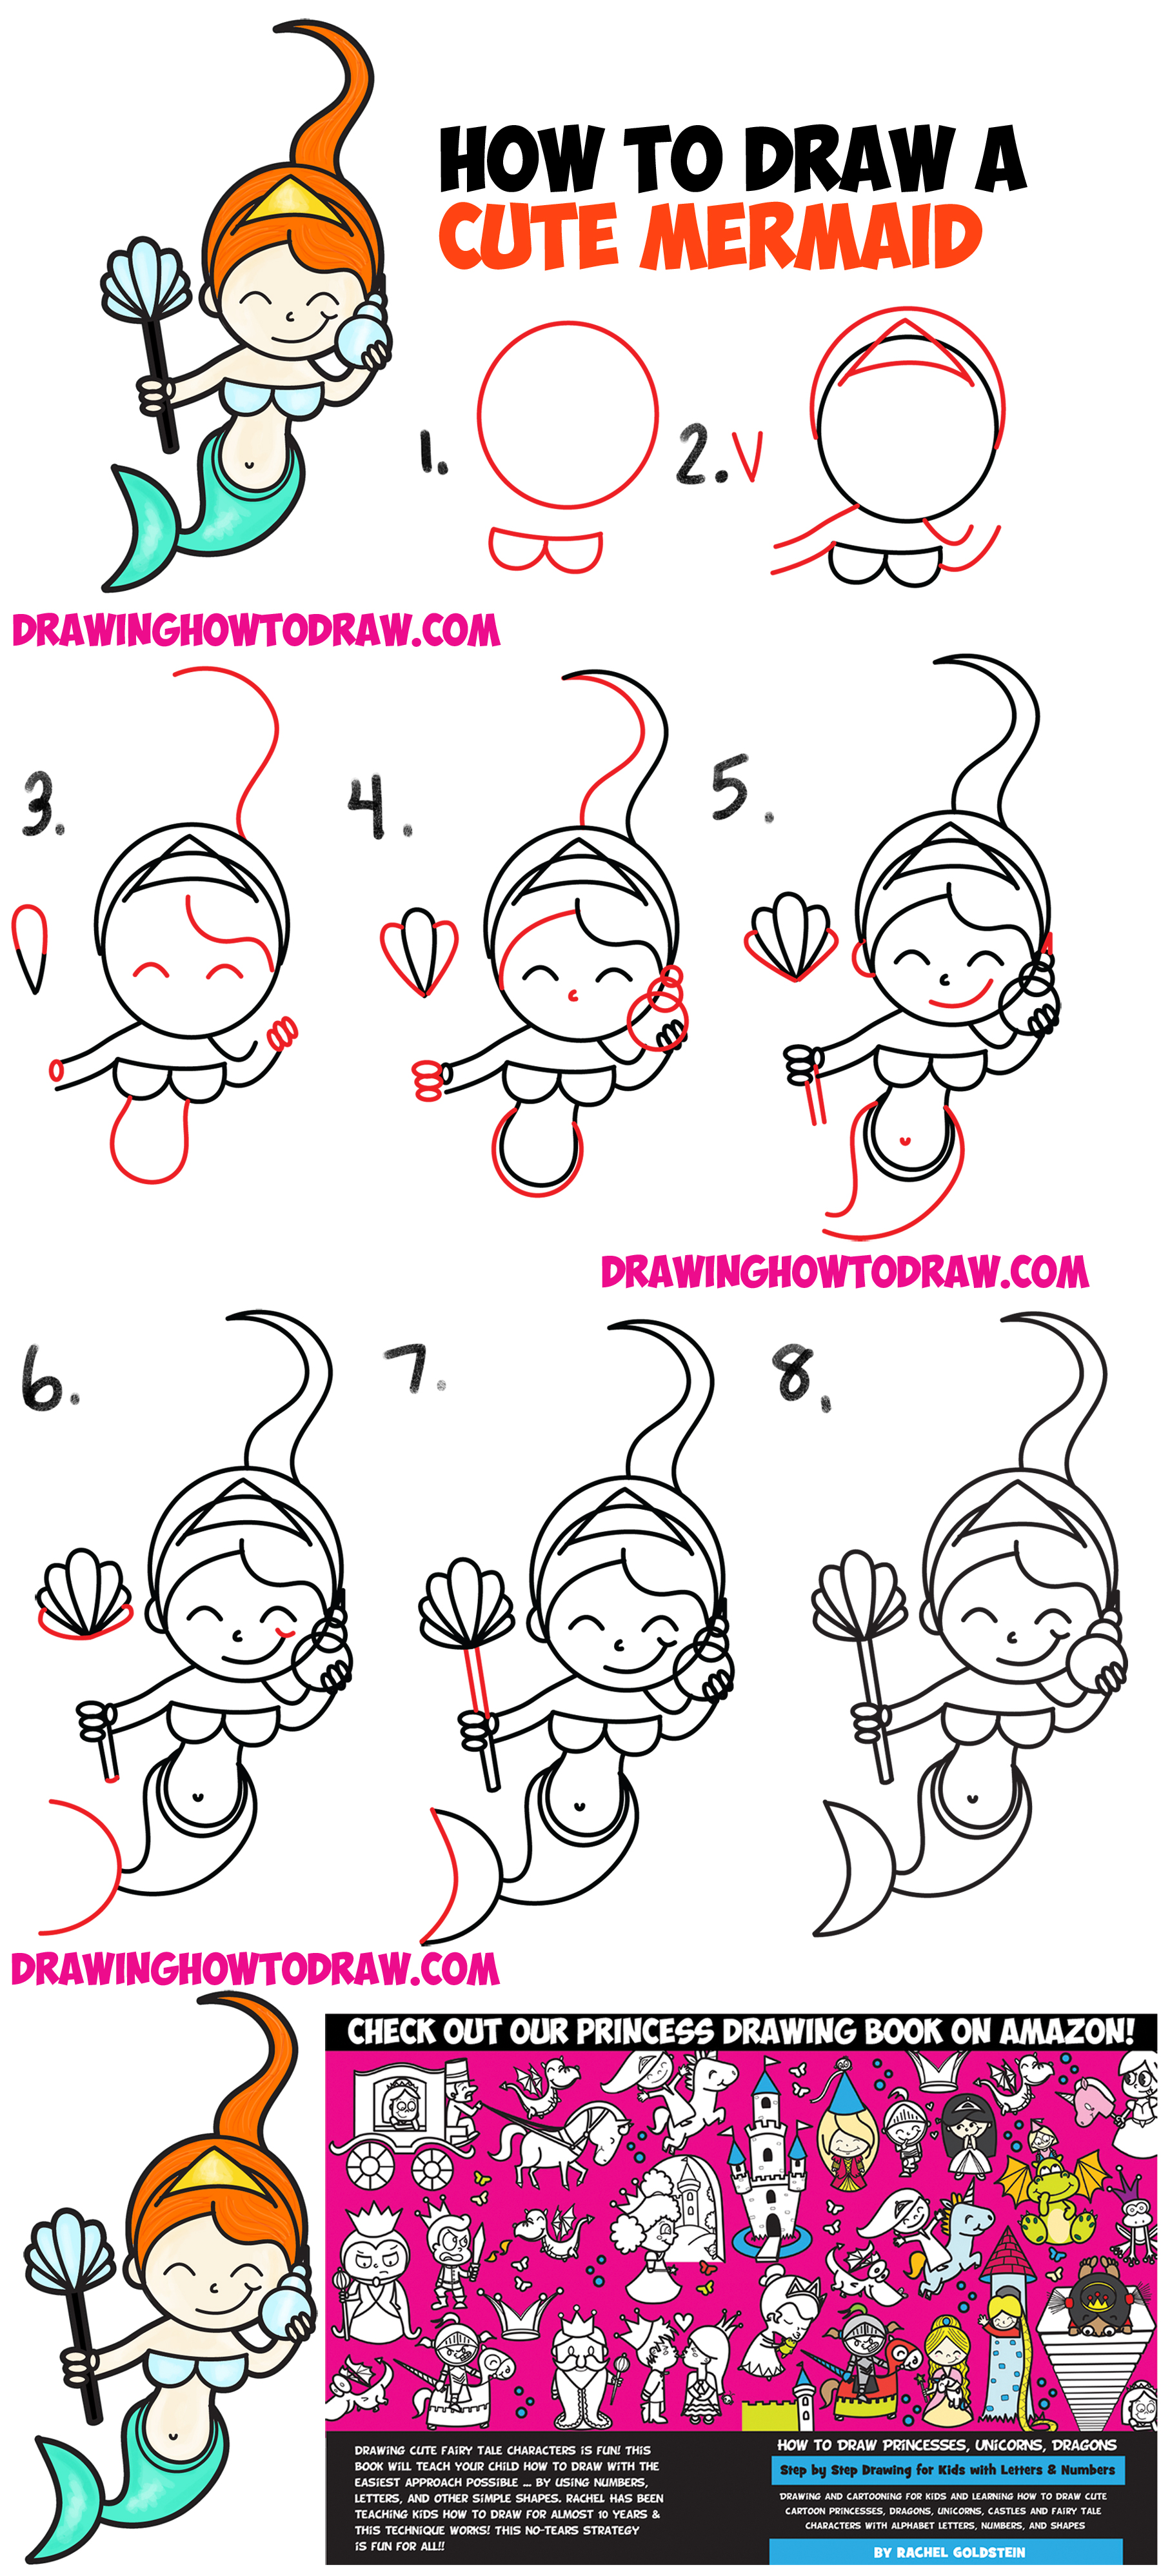 How to Draw a Cute Cartoon Mermaid (Kawaii) with Easy Step by Step Drawing Tutorial for Kids